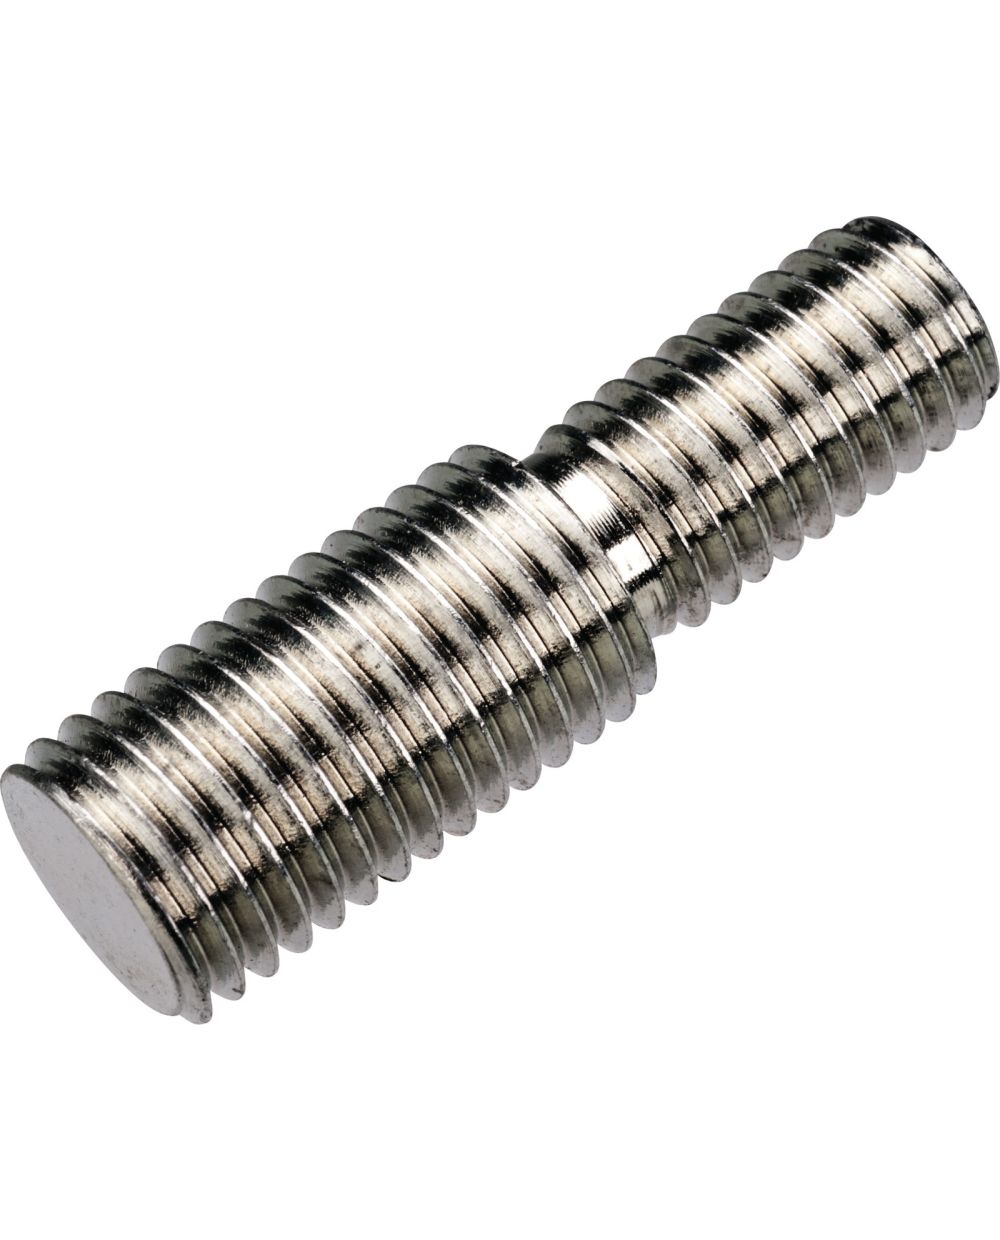 importante bota relé Double-threaded Setscrew M8x1.25 to M10x1.25, zinc-coated steel, outer  thread length 18mm (for repairing the upper shock absorber mount)